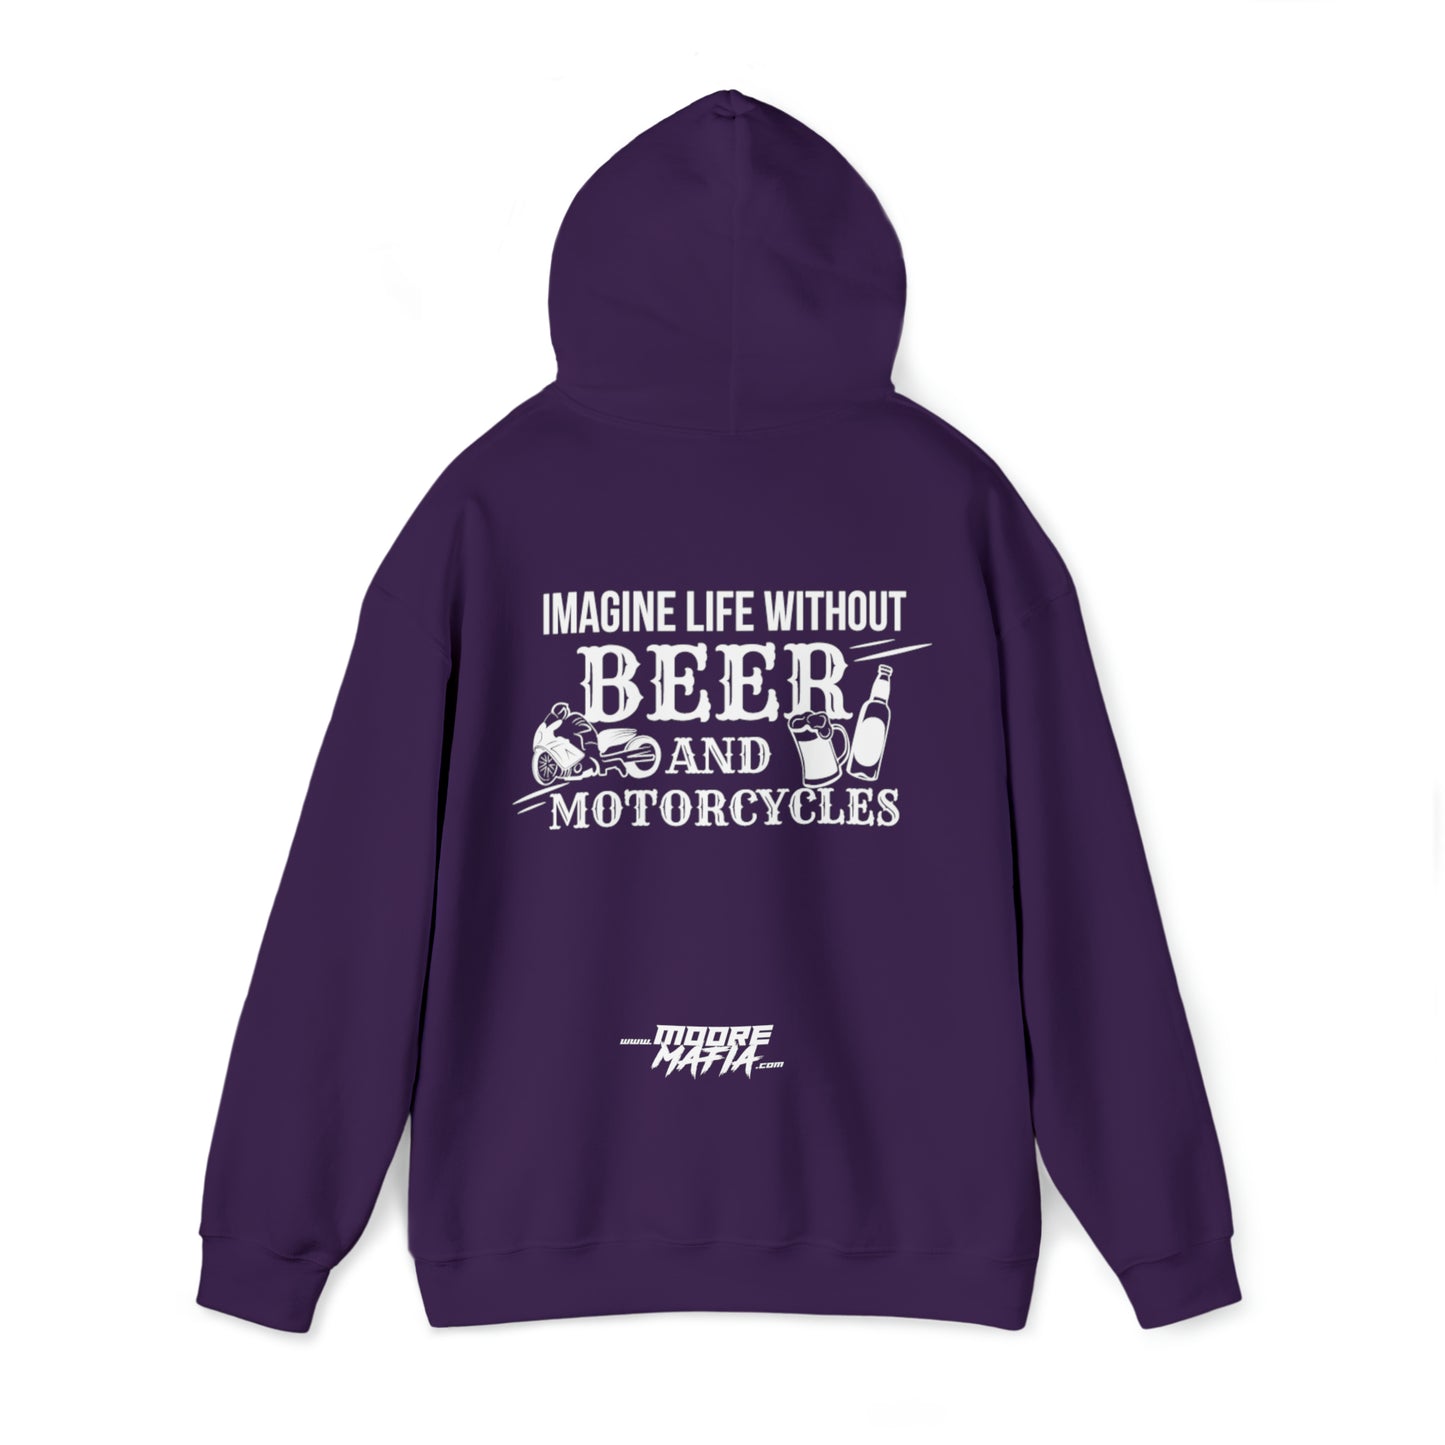 Life Without Beer And Motorcycles Hooded Sweatshirt